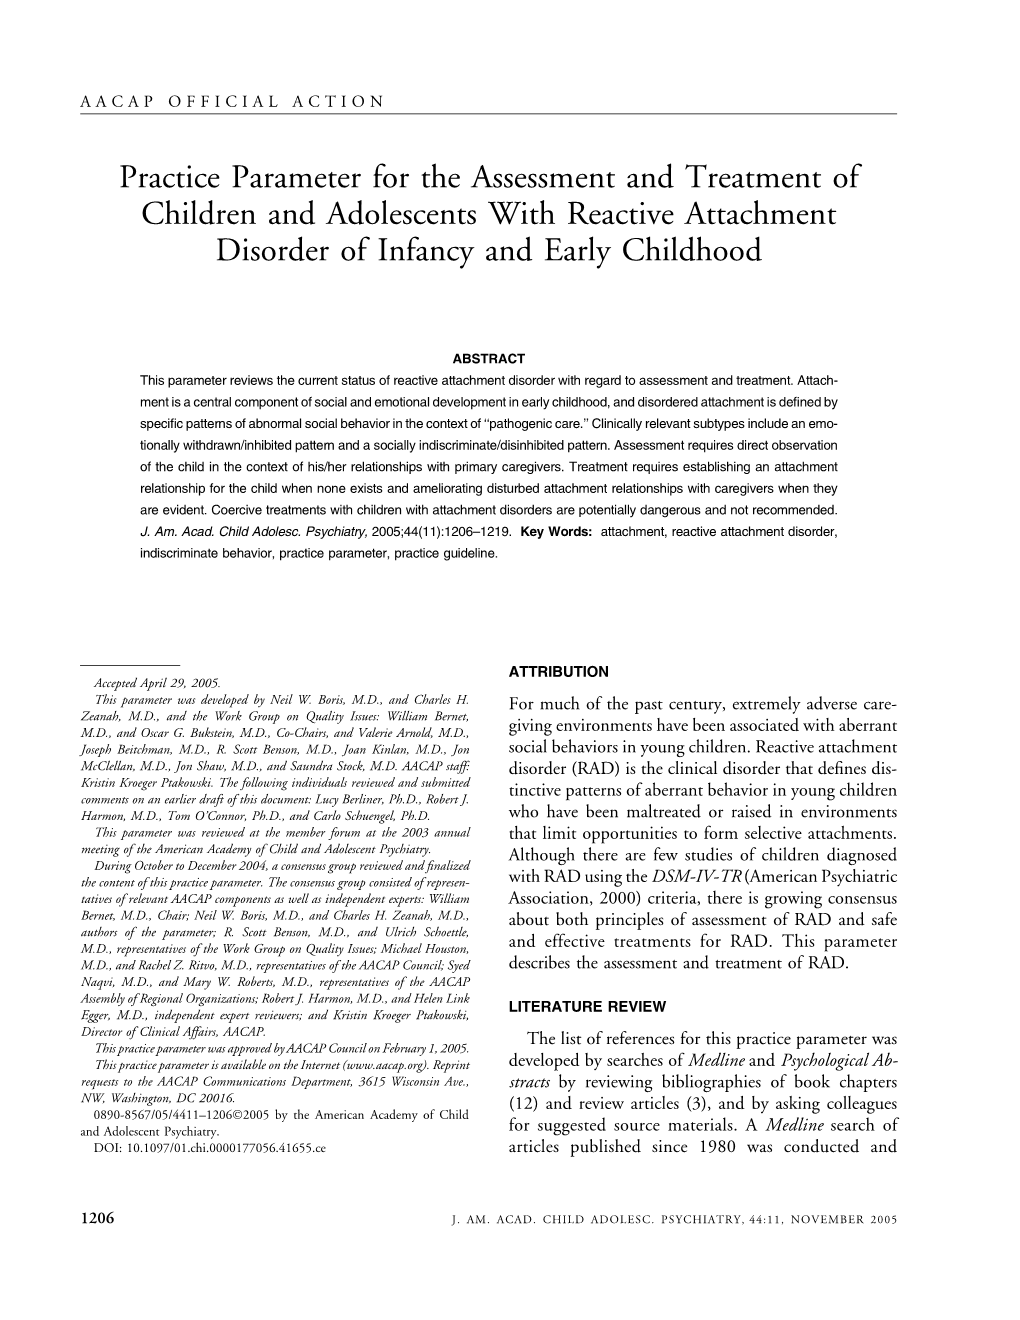 Practice Parameter for the Assessment and Treatment of Children and Adolescents with Reactive Attachment Disorder of Infancy and Early Childhood